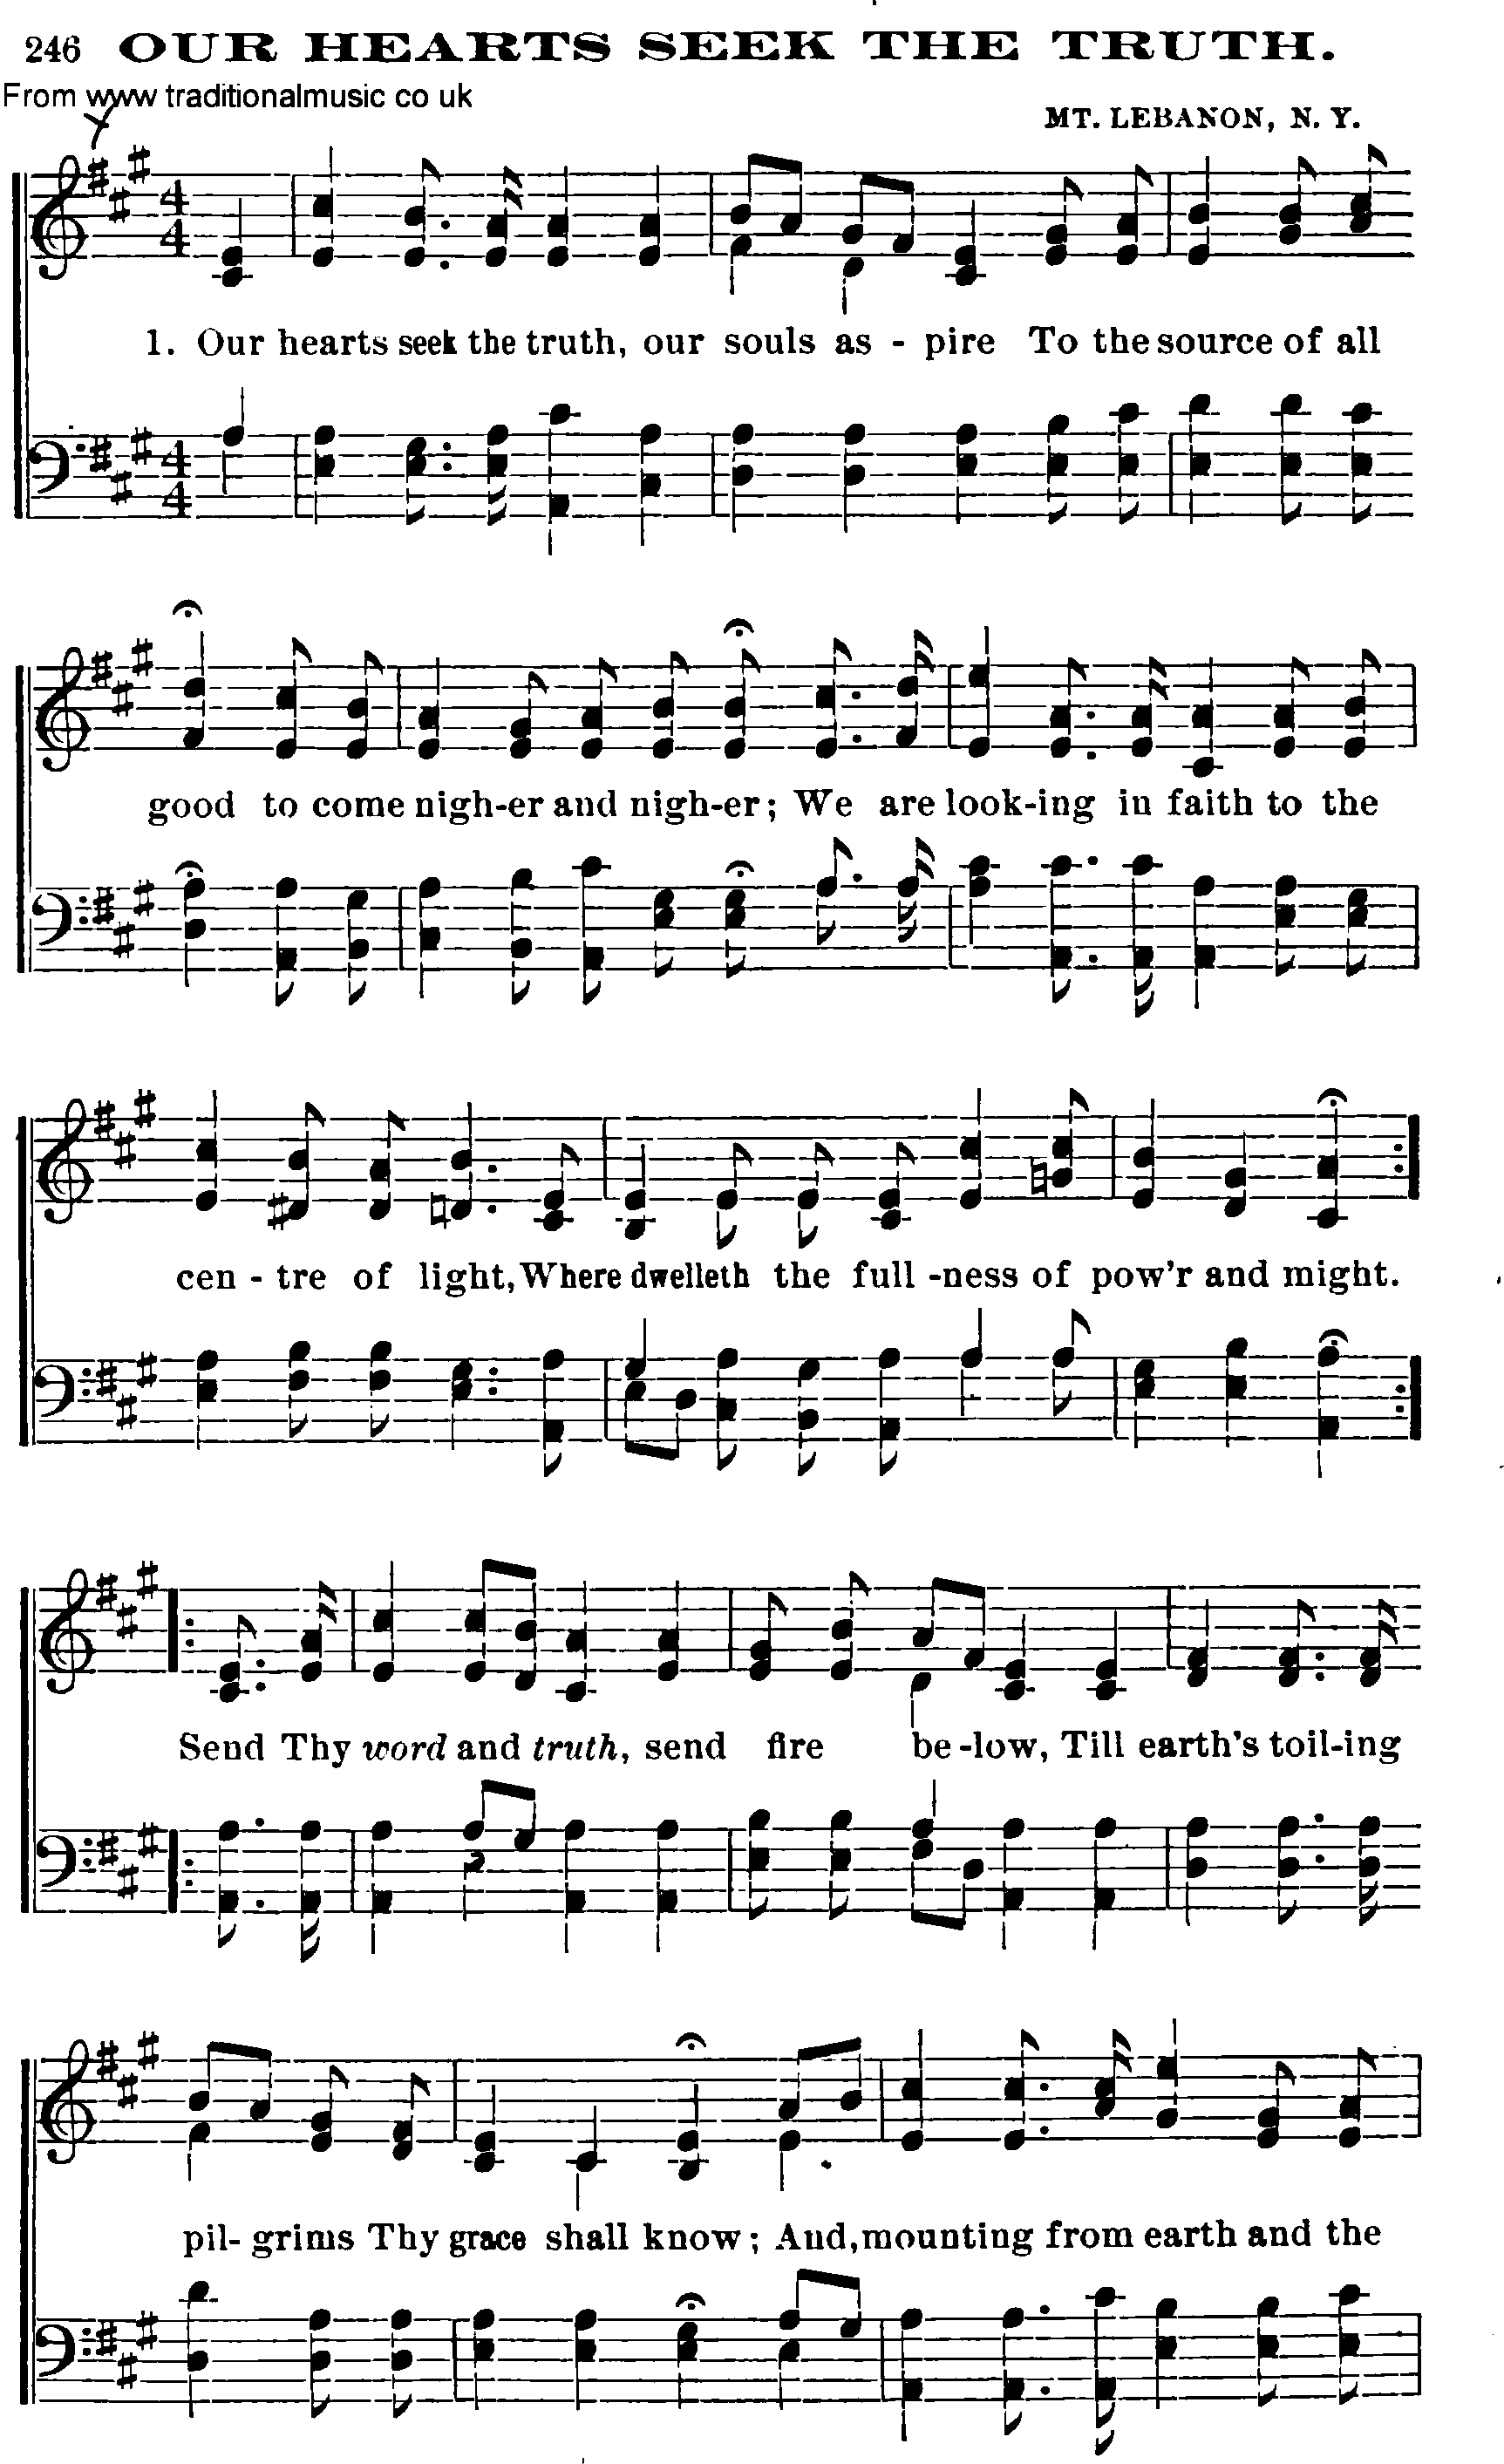 Shaker Music collection, Hymn: our hearts seek the truth, sheetmusic and PDF